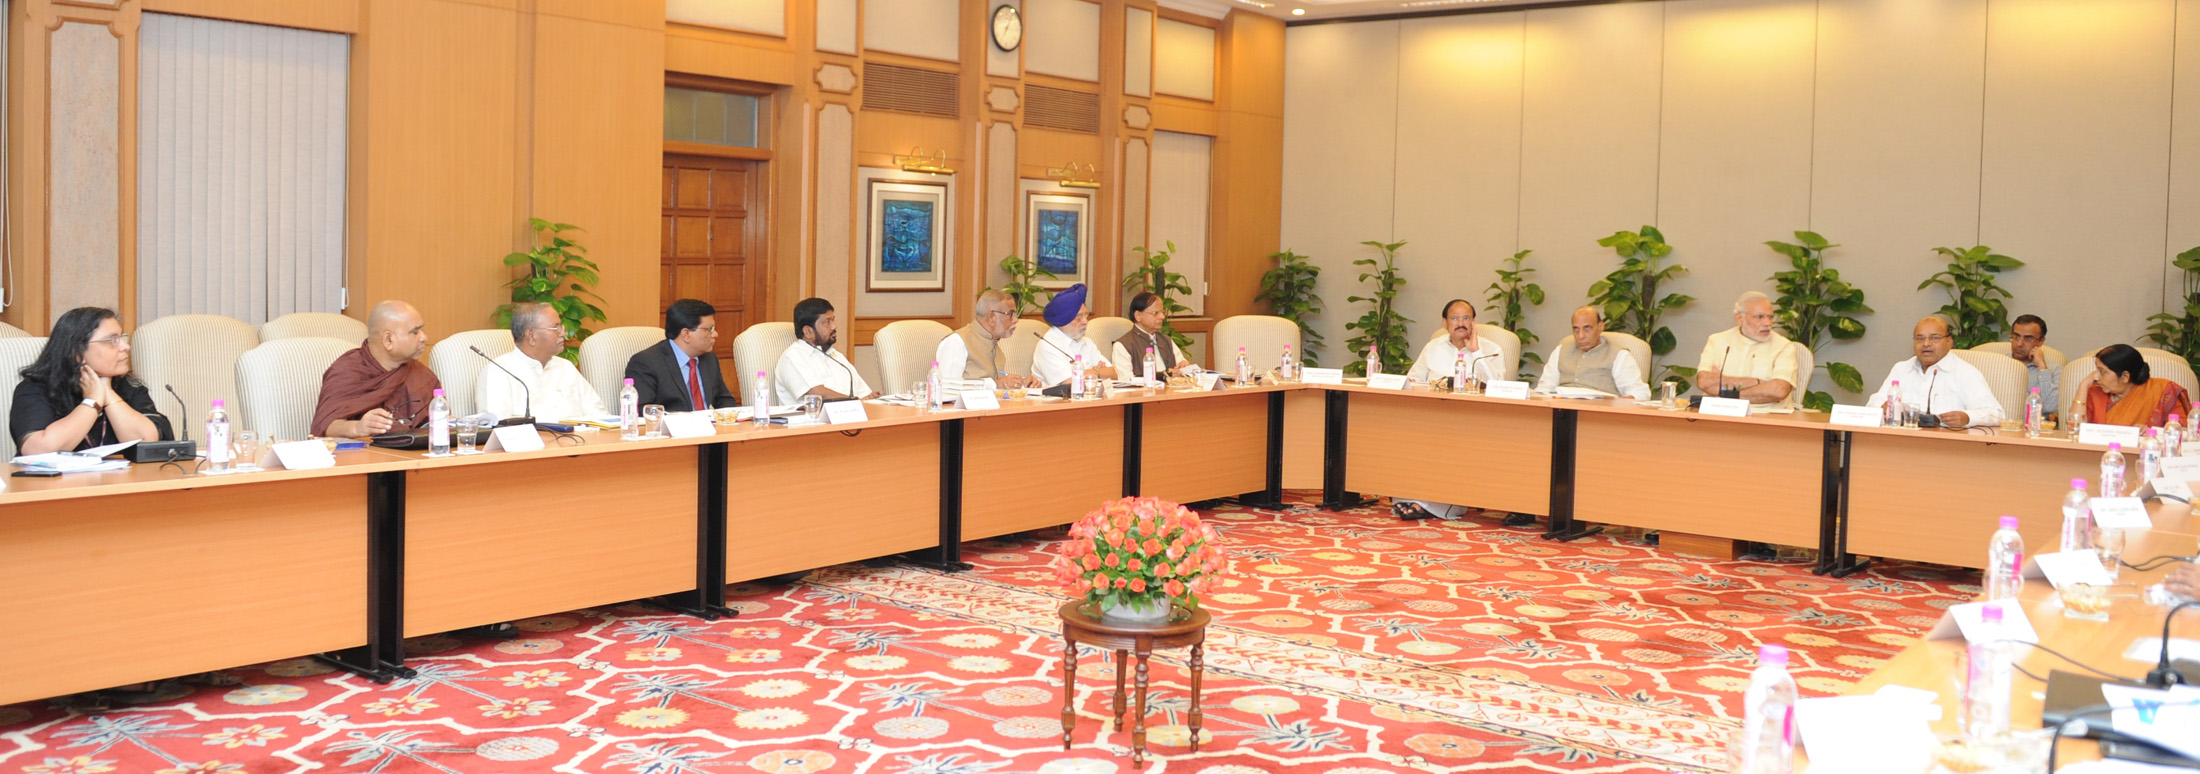 The Prime Minister, Shri Narendra Modi chairing the meeting of the National Committee on Nation-wide Celebration of 125th Birth Anniversary of the Dr. B.R. Ambedkar, in New Delhi on July 23, 2015.